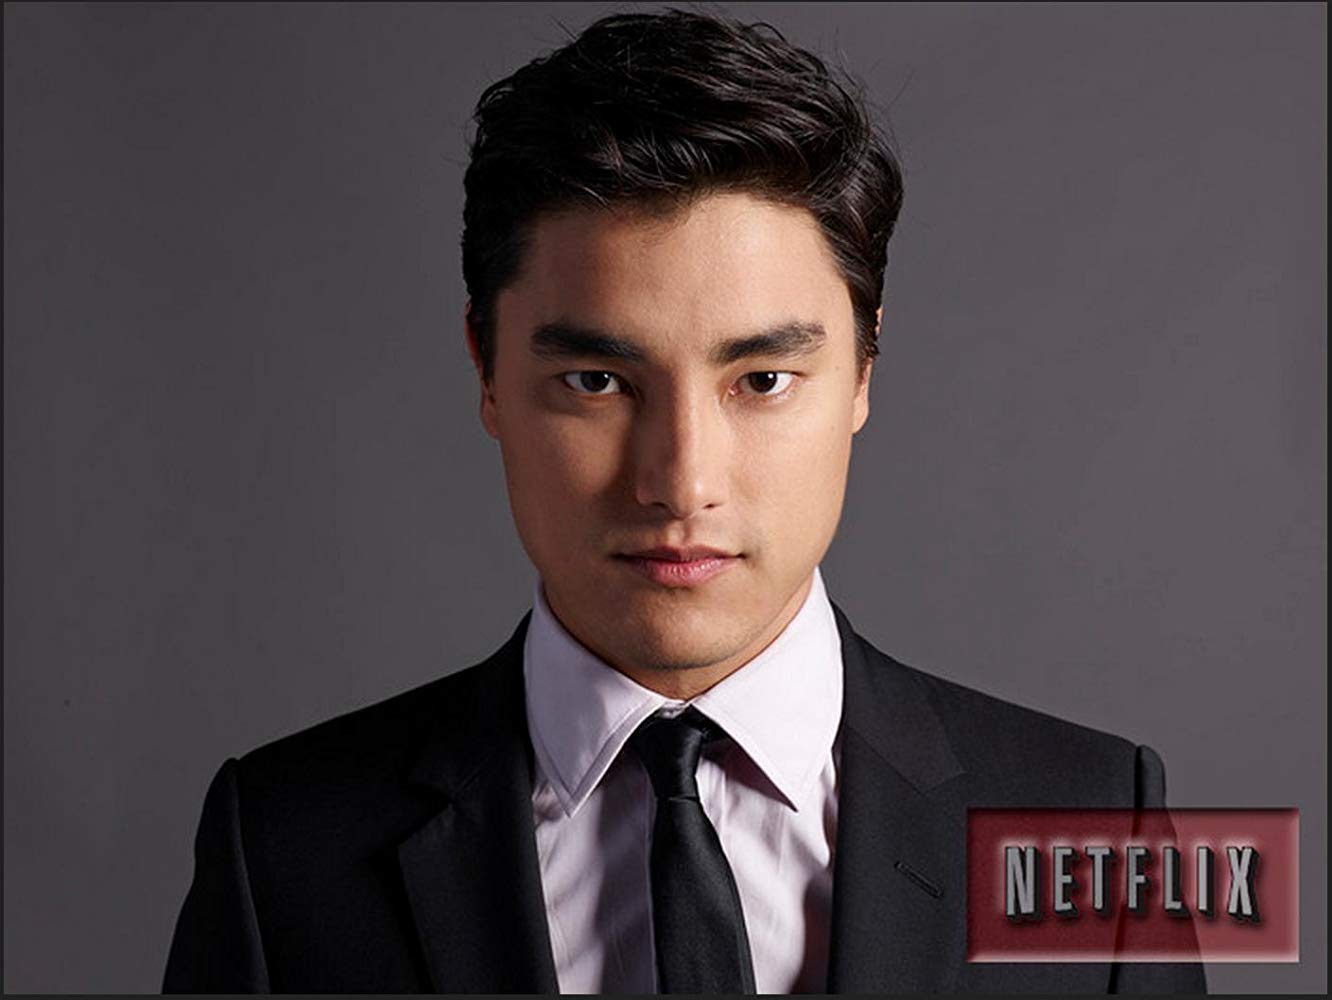 Remy Hii (Marco Polo) rejoint le casting de Spider-Man : Far From Home | COMICSBLOG.fr1332 x 1000